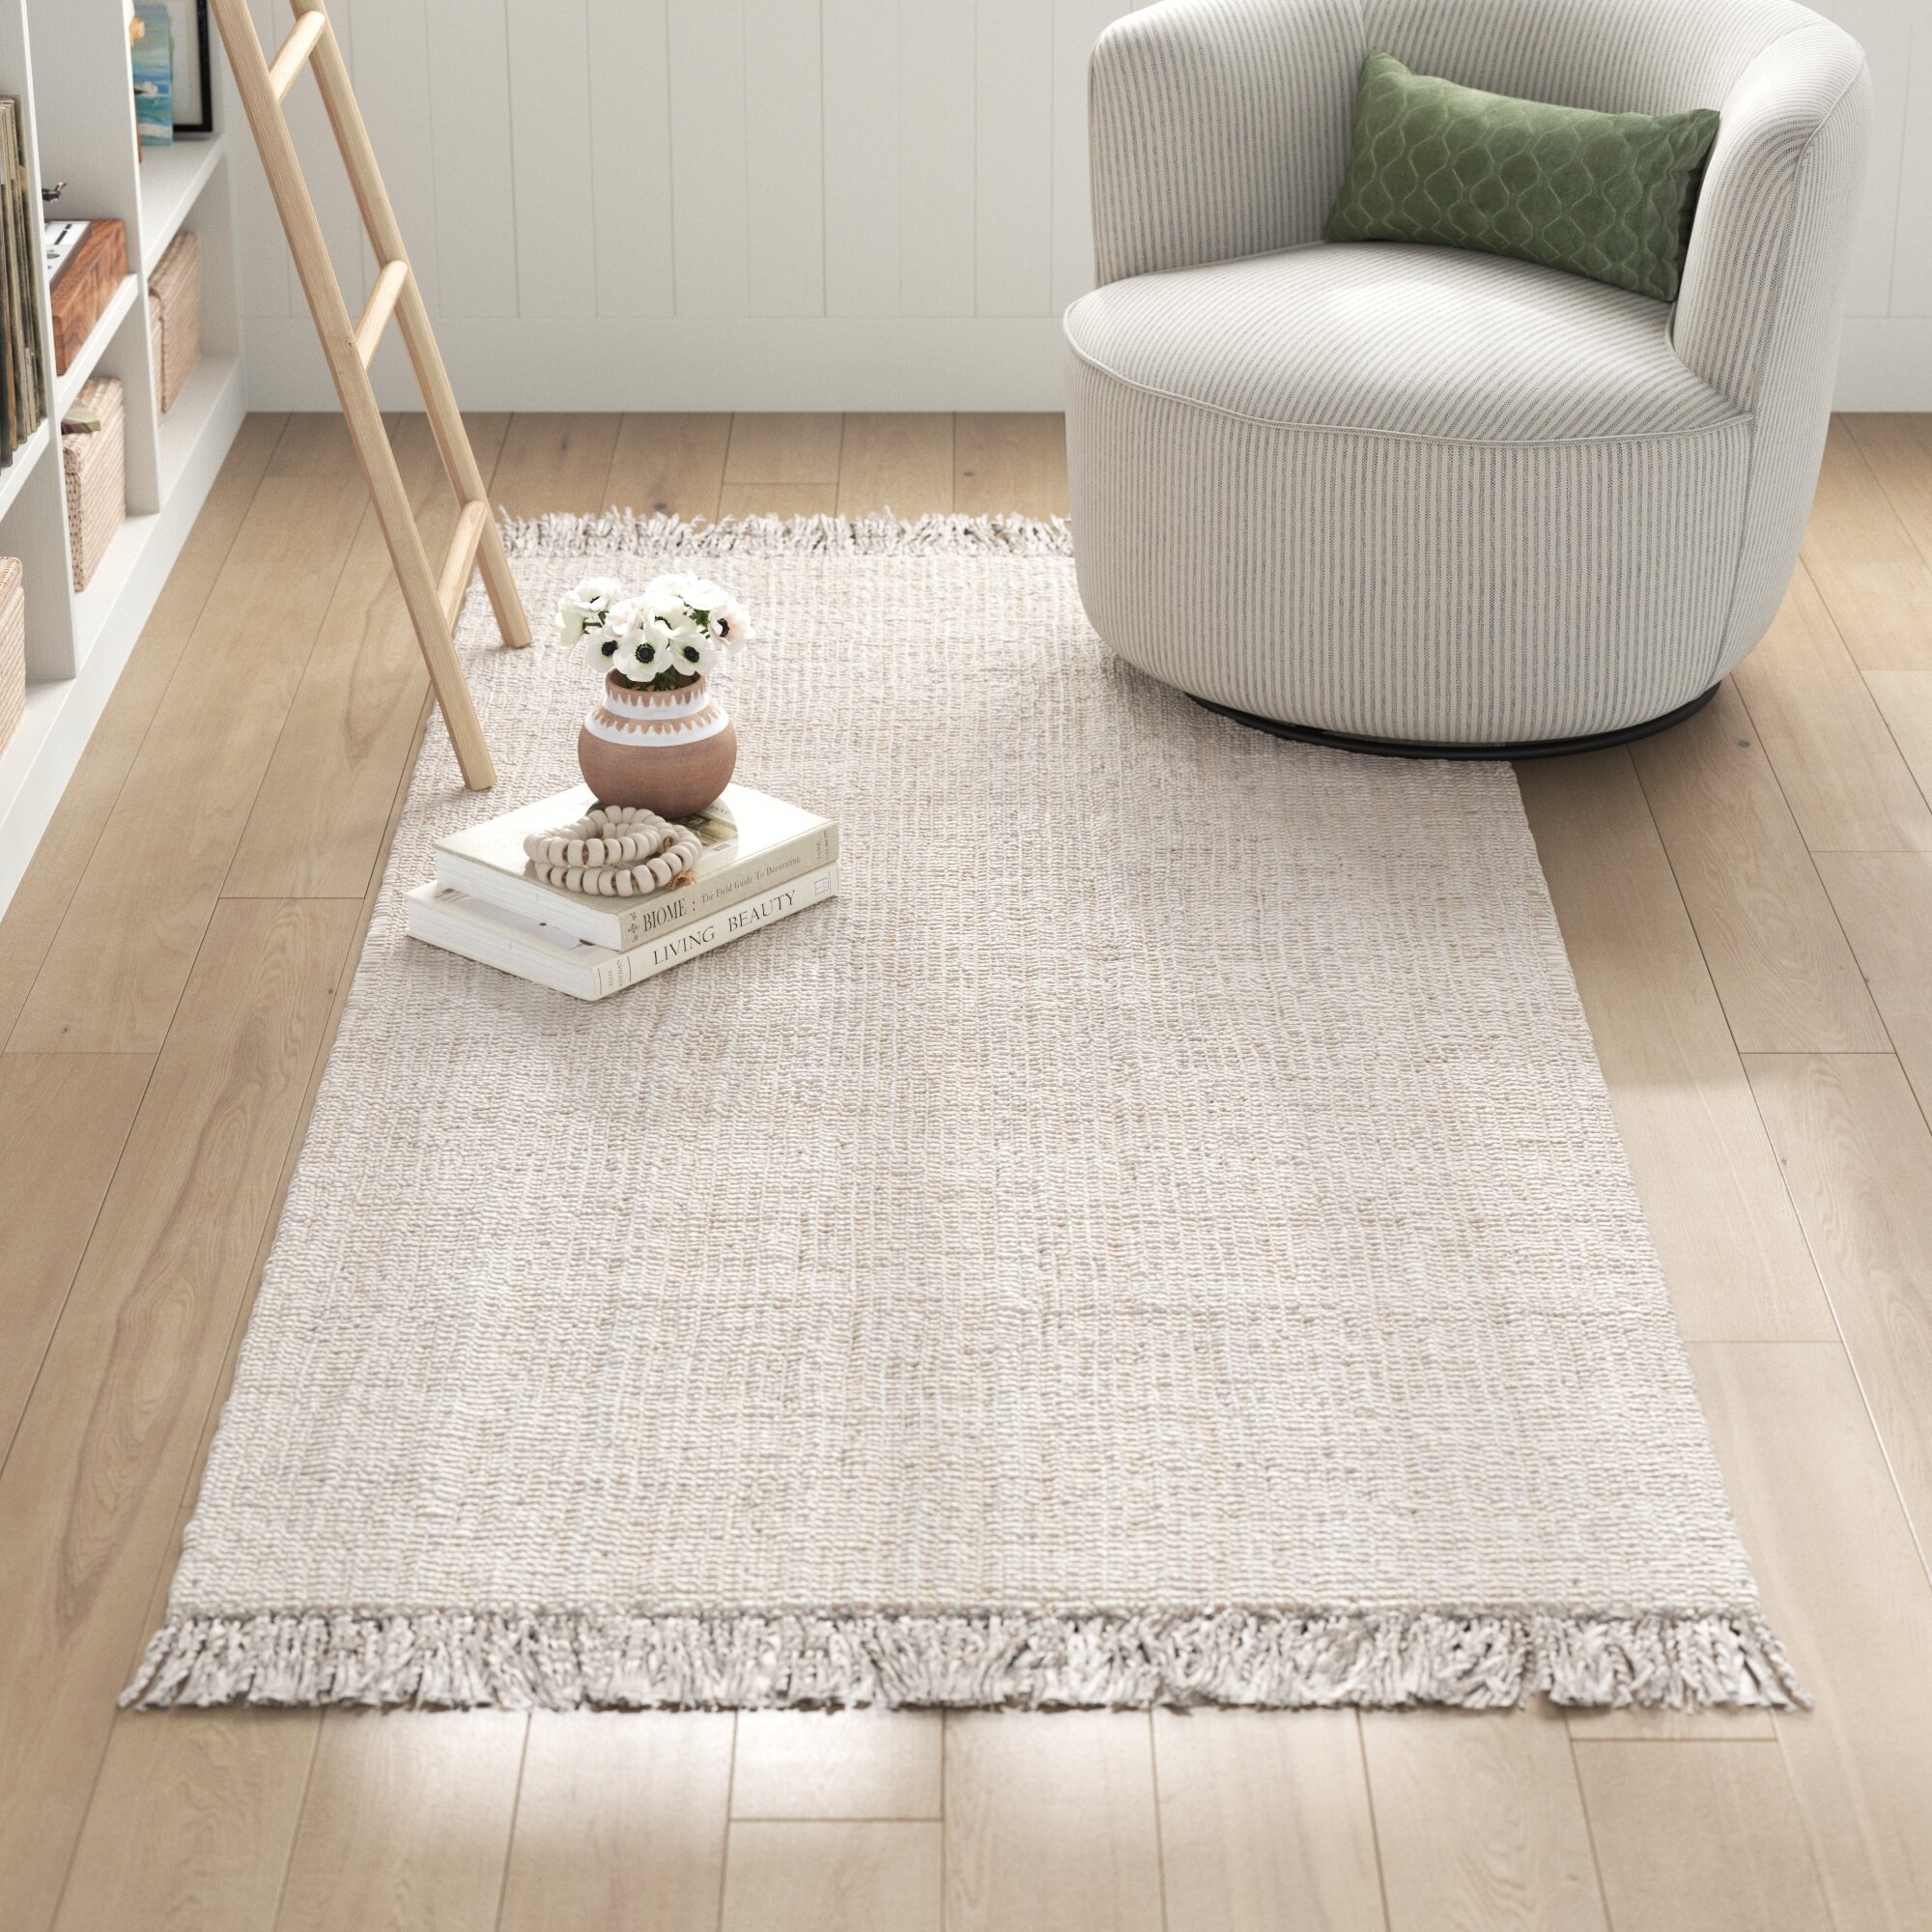 Highland Dunes Cruise Handmade Braided Jute Area Rug in Off White & Reviews